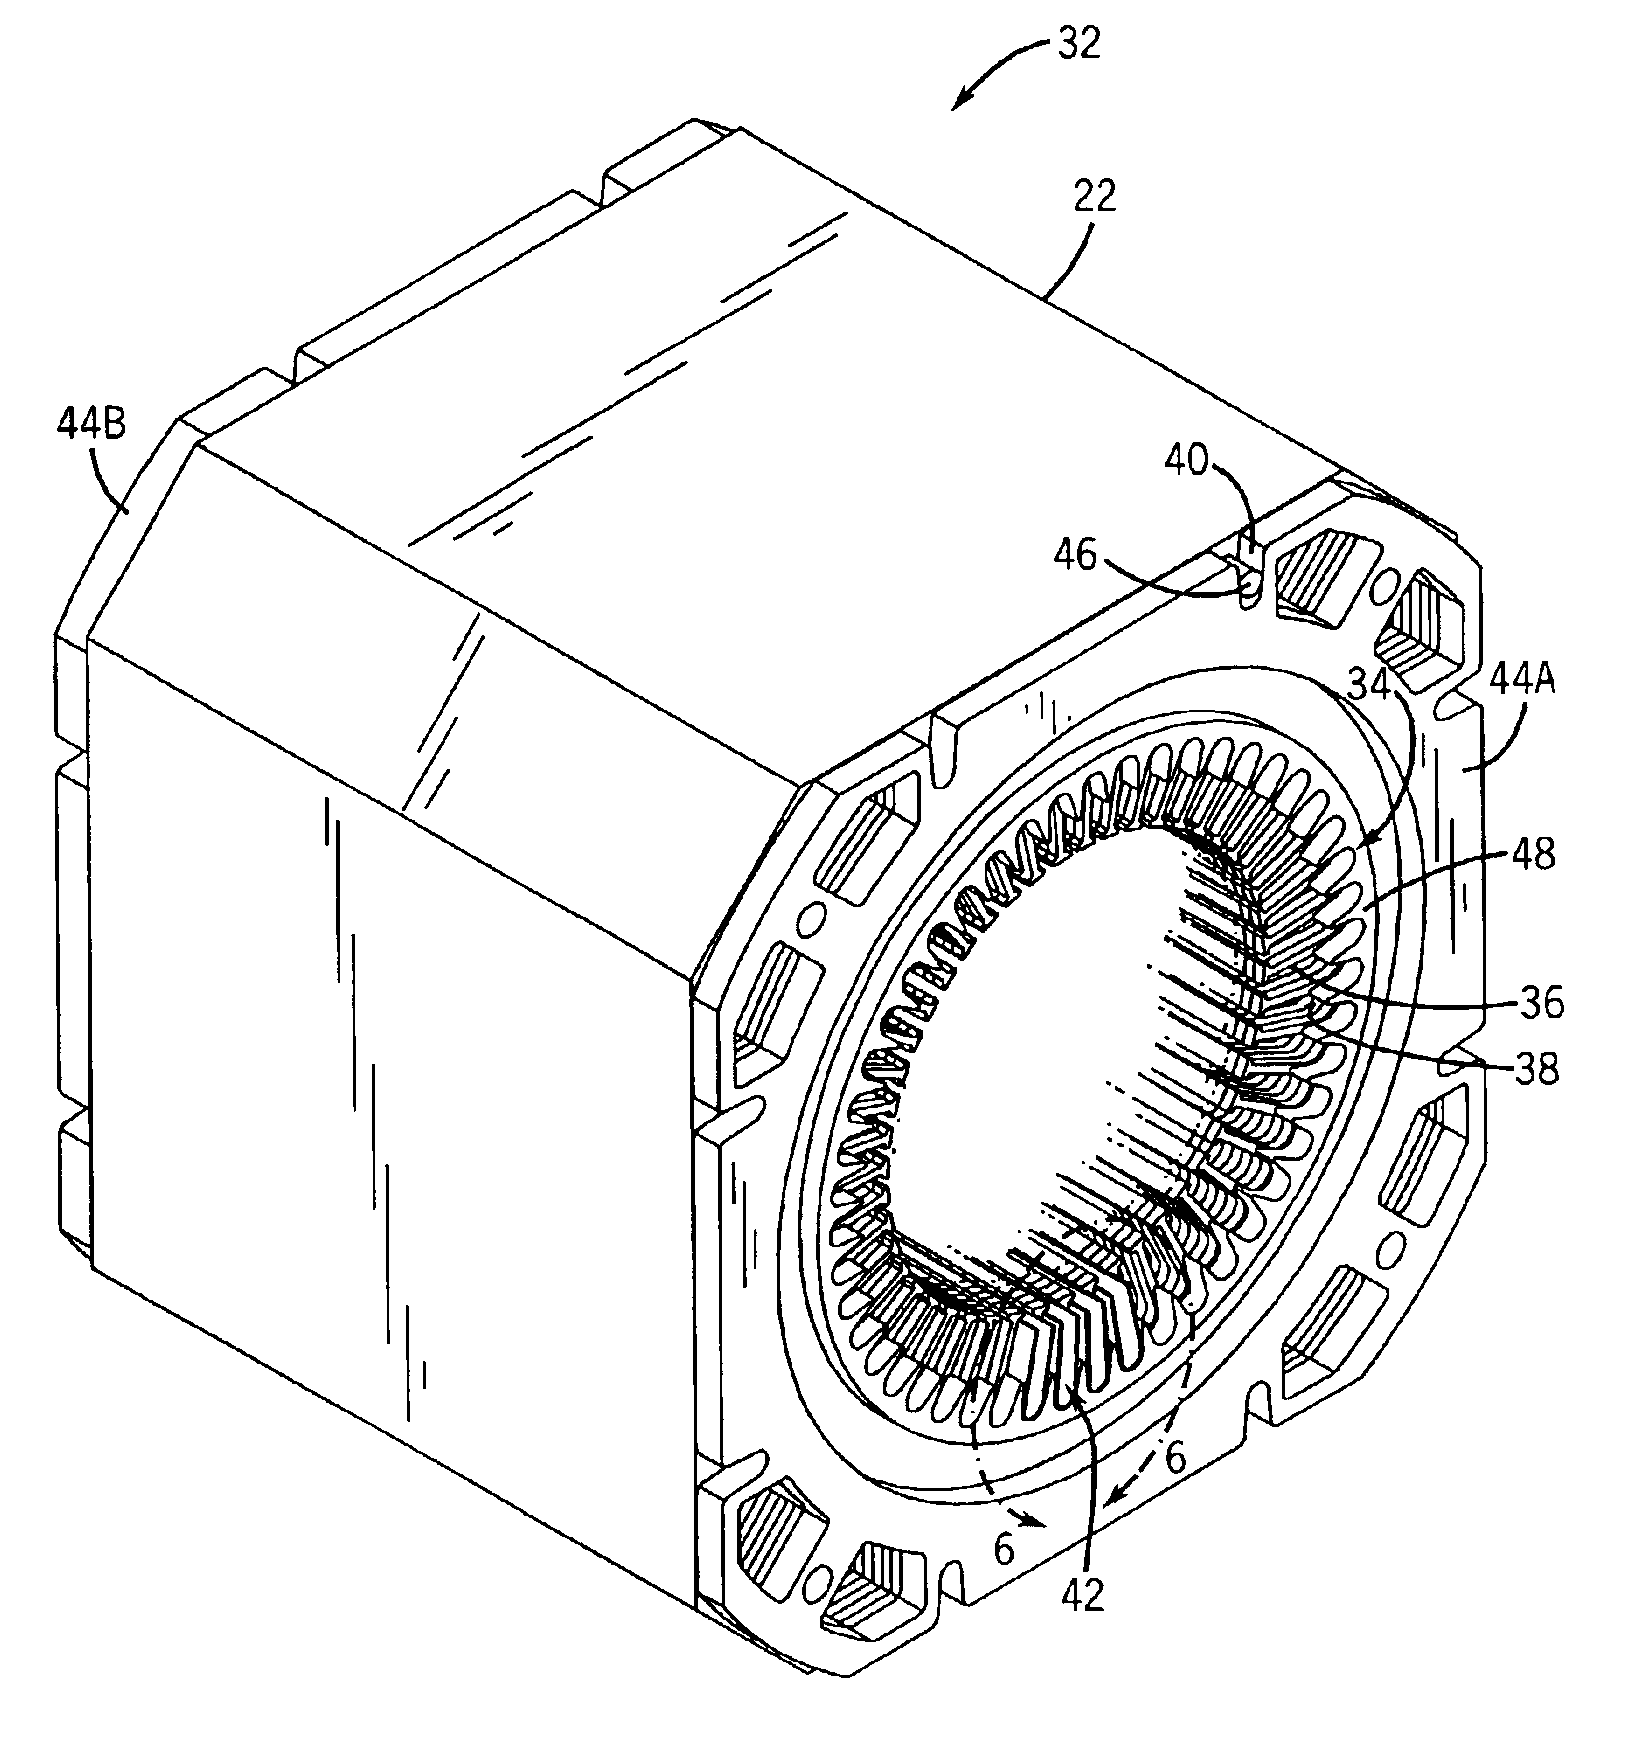 Electric apparatus having a stator with insulated end laminations within the central opening of end plates